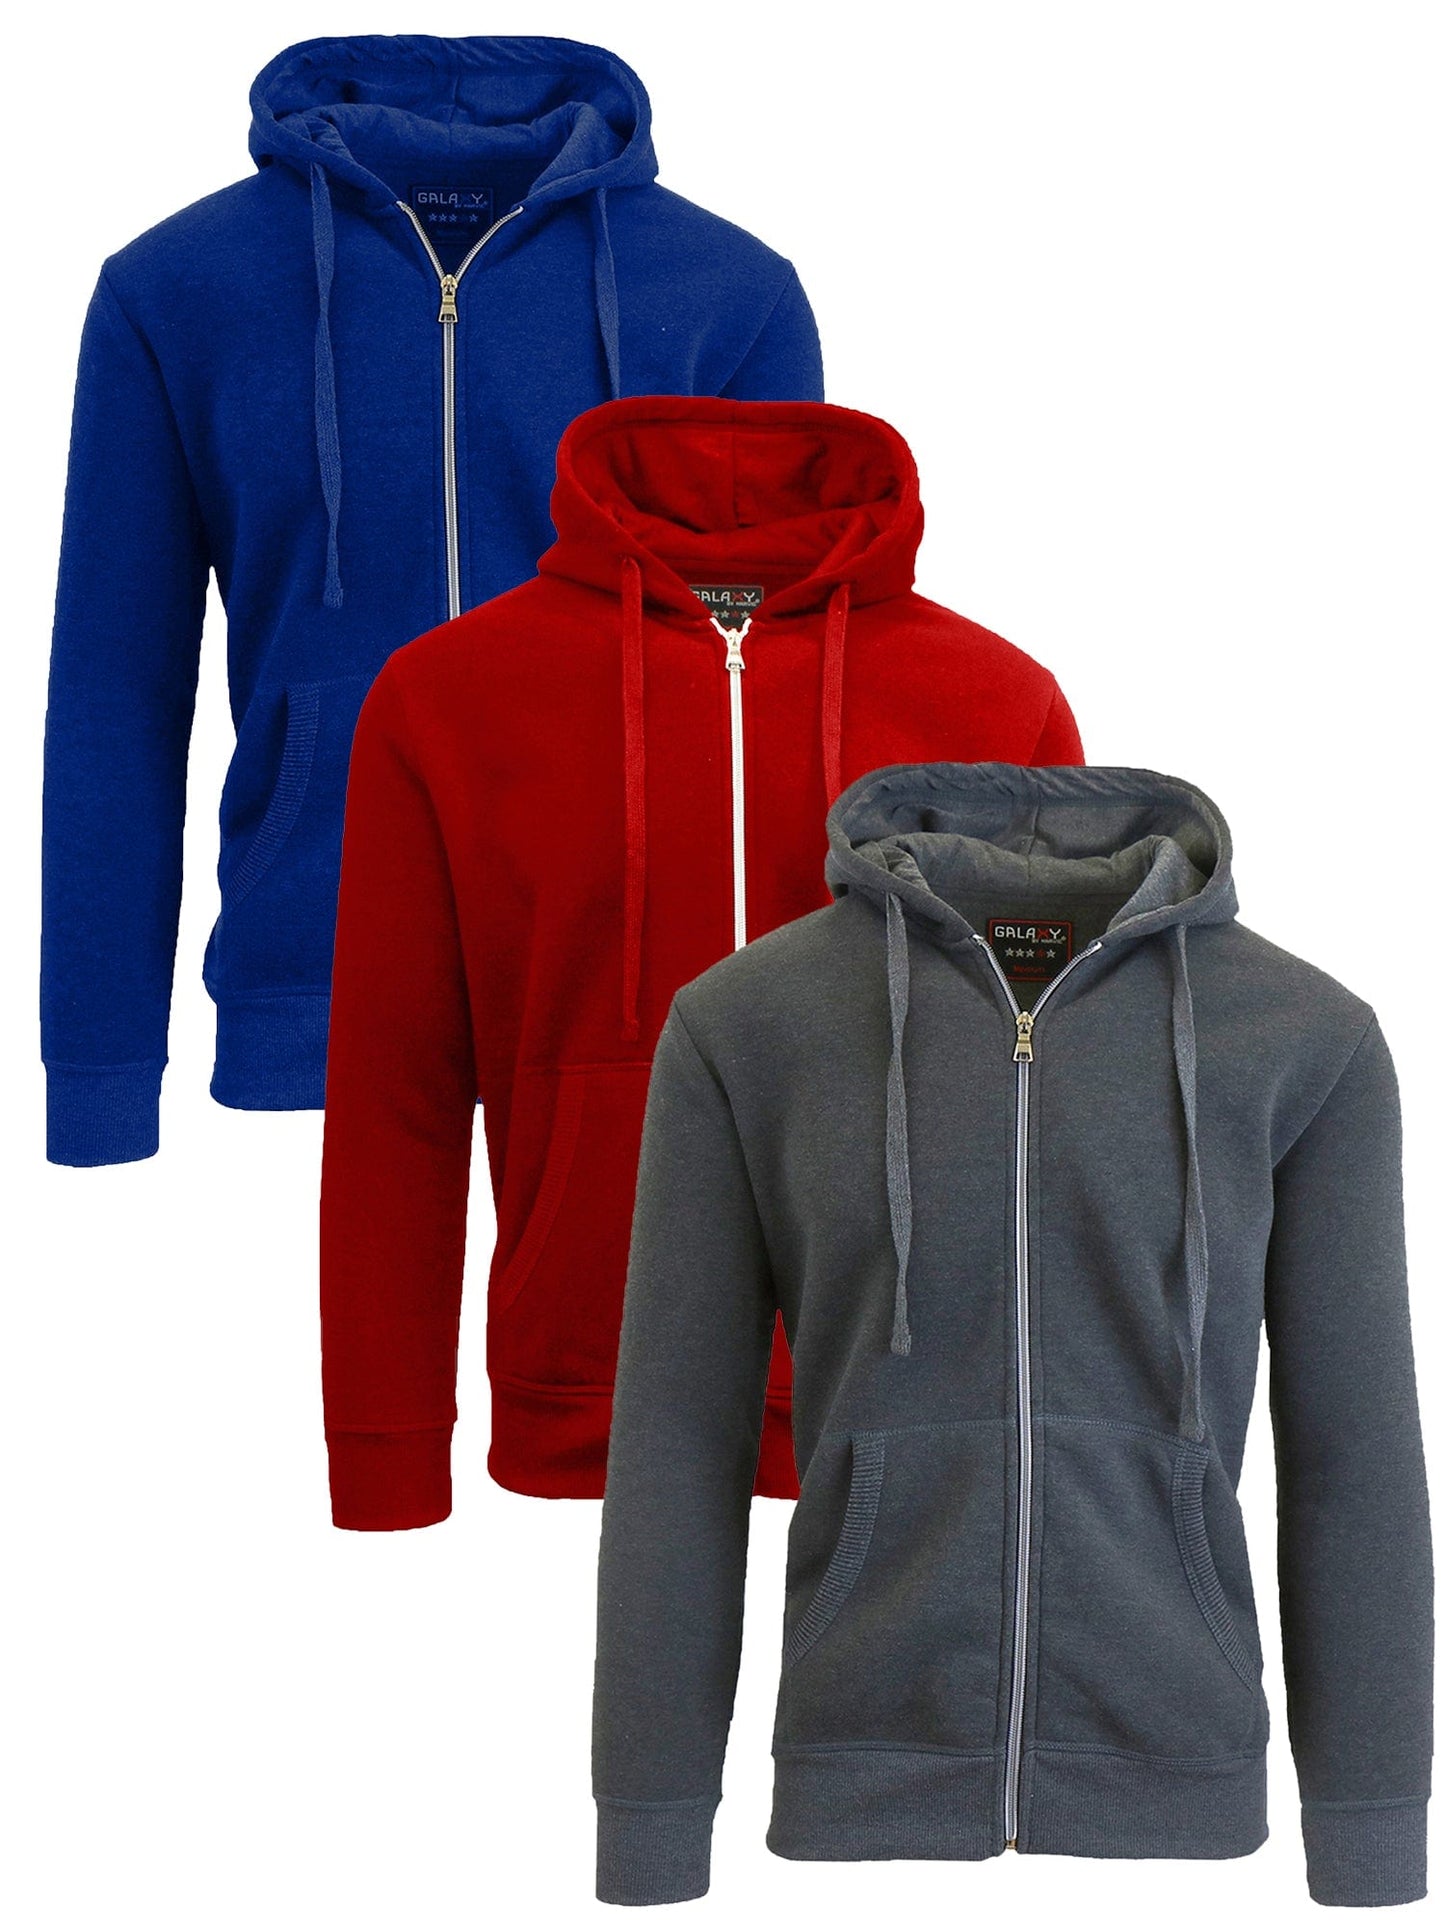 3-Pack Galaxy By Harvic Boy's Fleece-Lined Zip Hoodie (S-XL) - GalaxybyHarvic